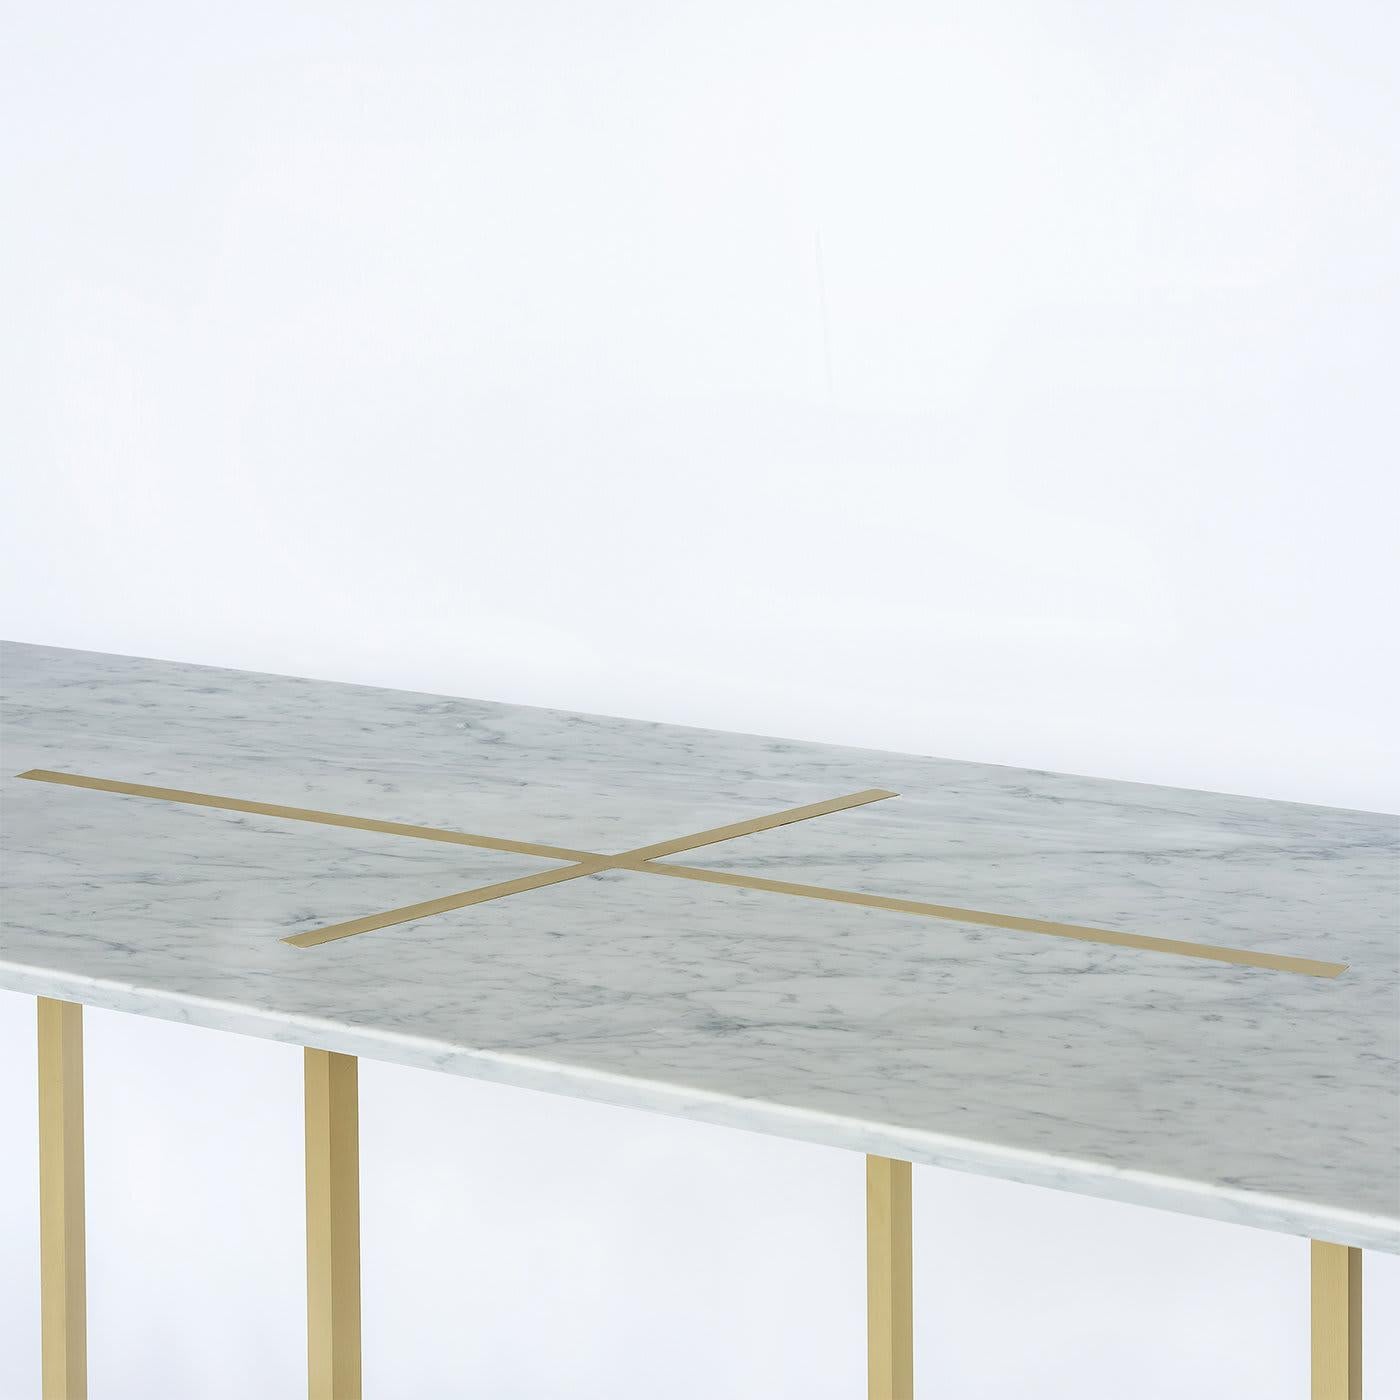 Expanding on the “Eclipse” table series, this dining table features a thick slab of white Carrera marble. 
The slim figured frame is made of solid brushed brass.